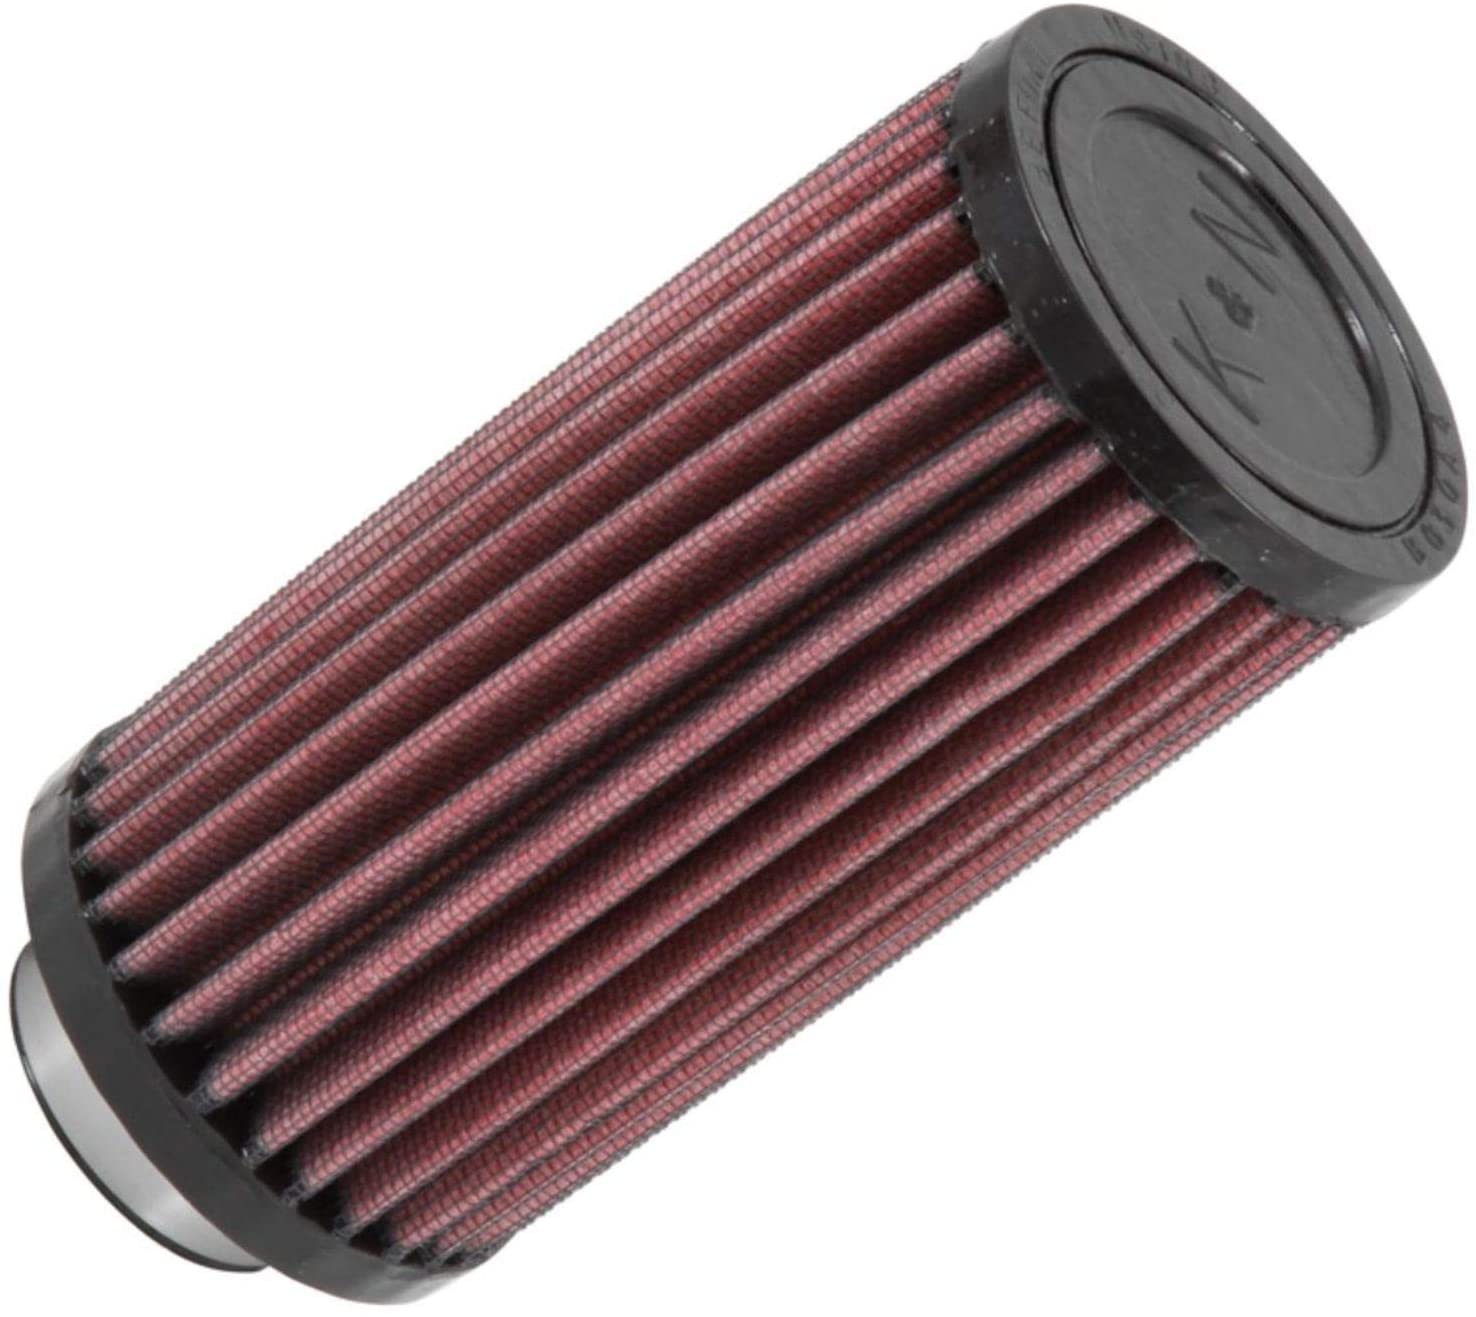 K&N Universal Clamp-On Air Filter: High Performance, Premium, Washable, Replacement Filter: Flange Diameter: 1.5 In, Filter Height: 6 In, Flange Length: 0.625 In, Shape: Round Straight, RU-0175